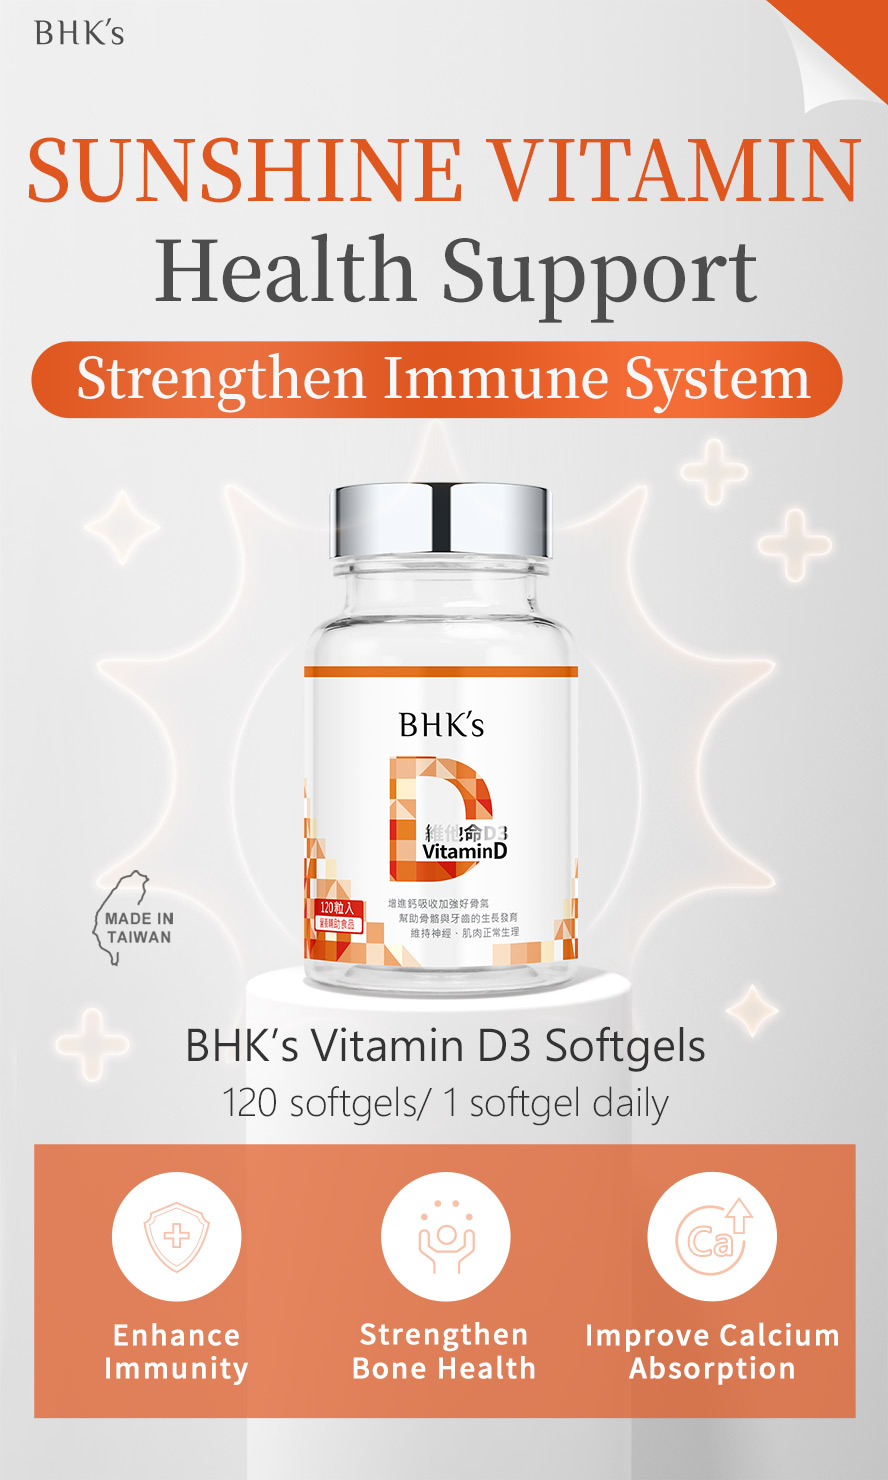 BHK's Vitamin D3 plays a role in enhance immunity, strengthen bone health, and imrpove calcium absorption.